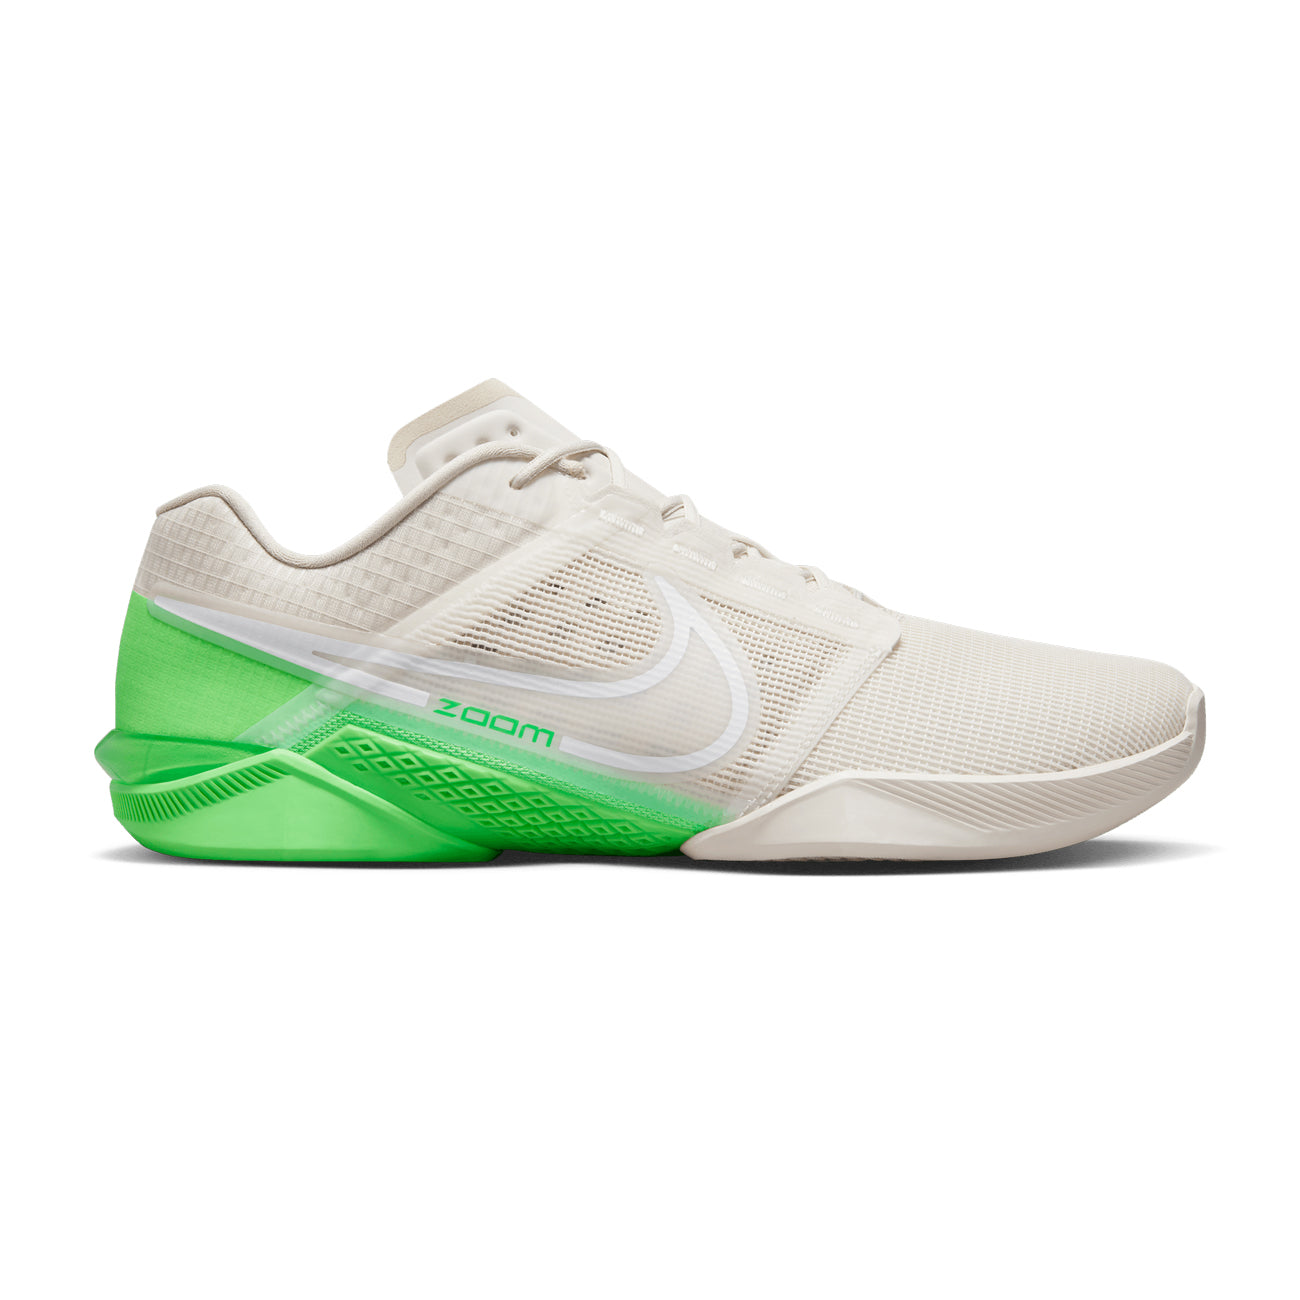 Nike Zoom Metcon Turbo 2 in phantom white and volt colors